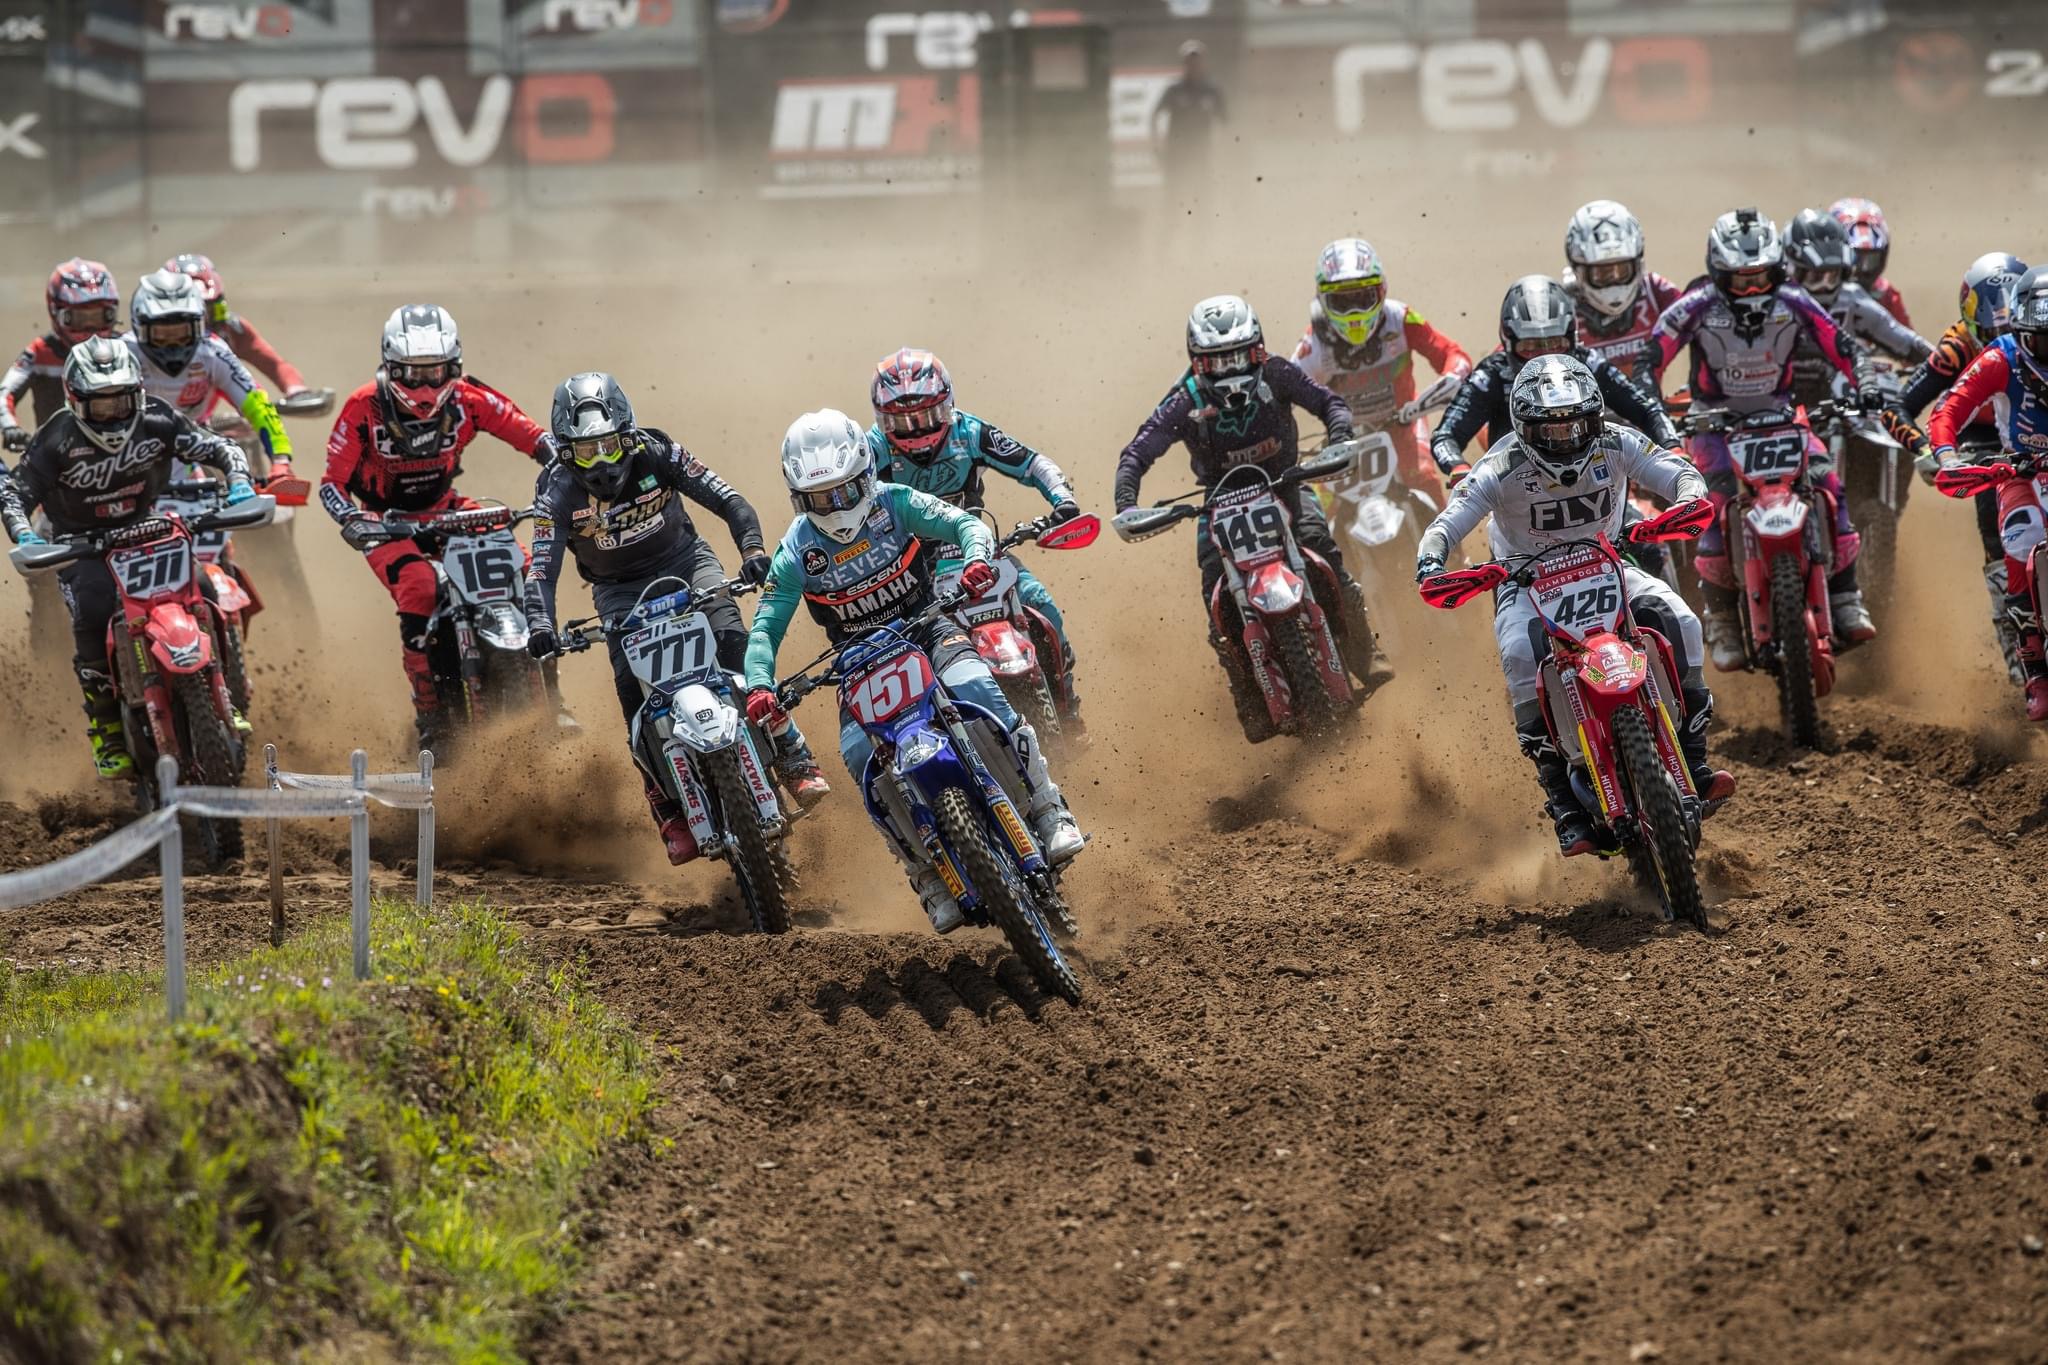 Roaring Engines and Thrilling Rivalries: Hawkstone Park Set for Motocross Madness in the Revo ACU British Championship!